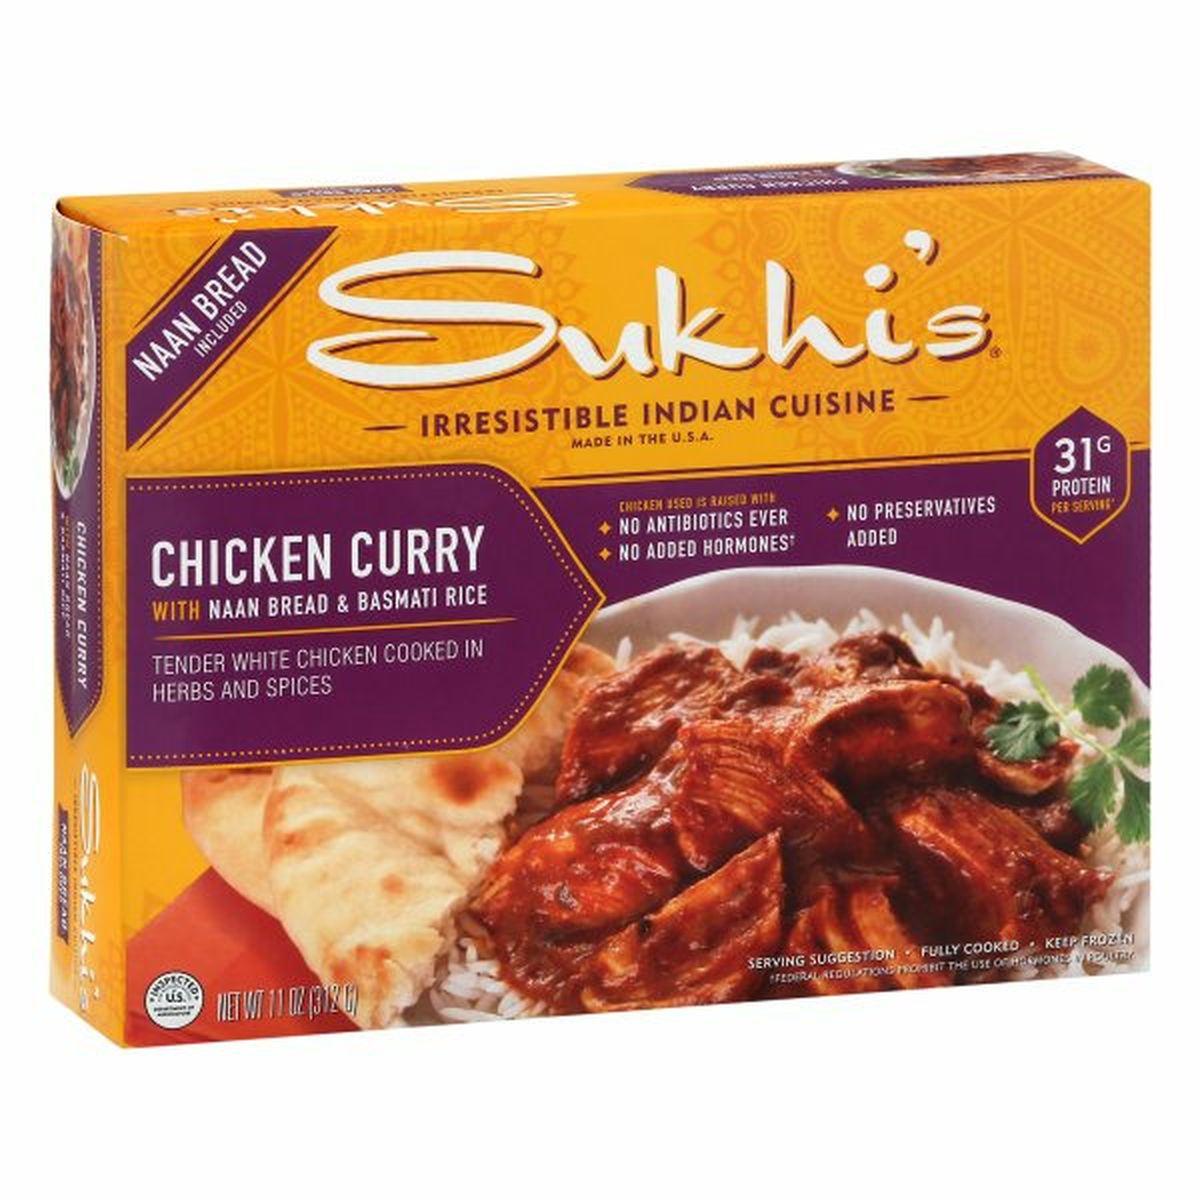 Calories in Sukhi's Chicken Curry